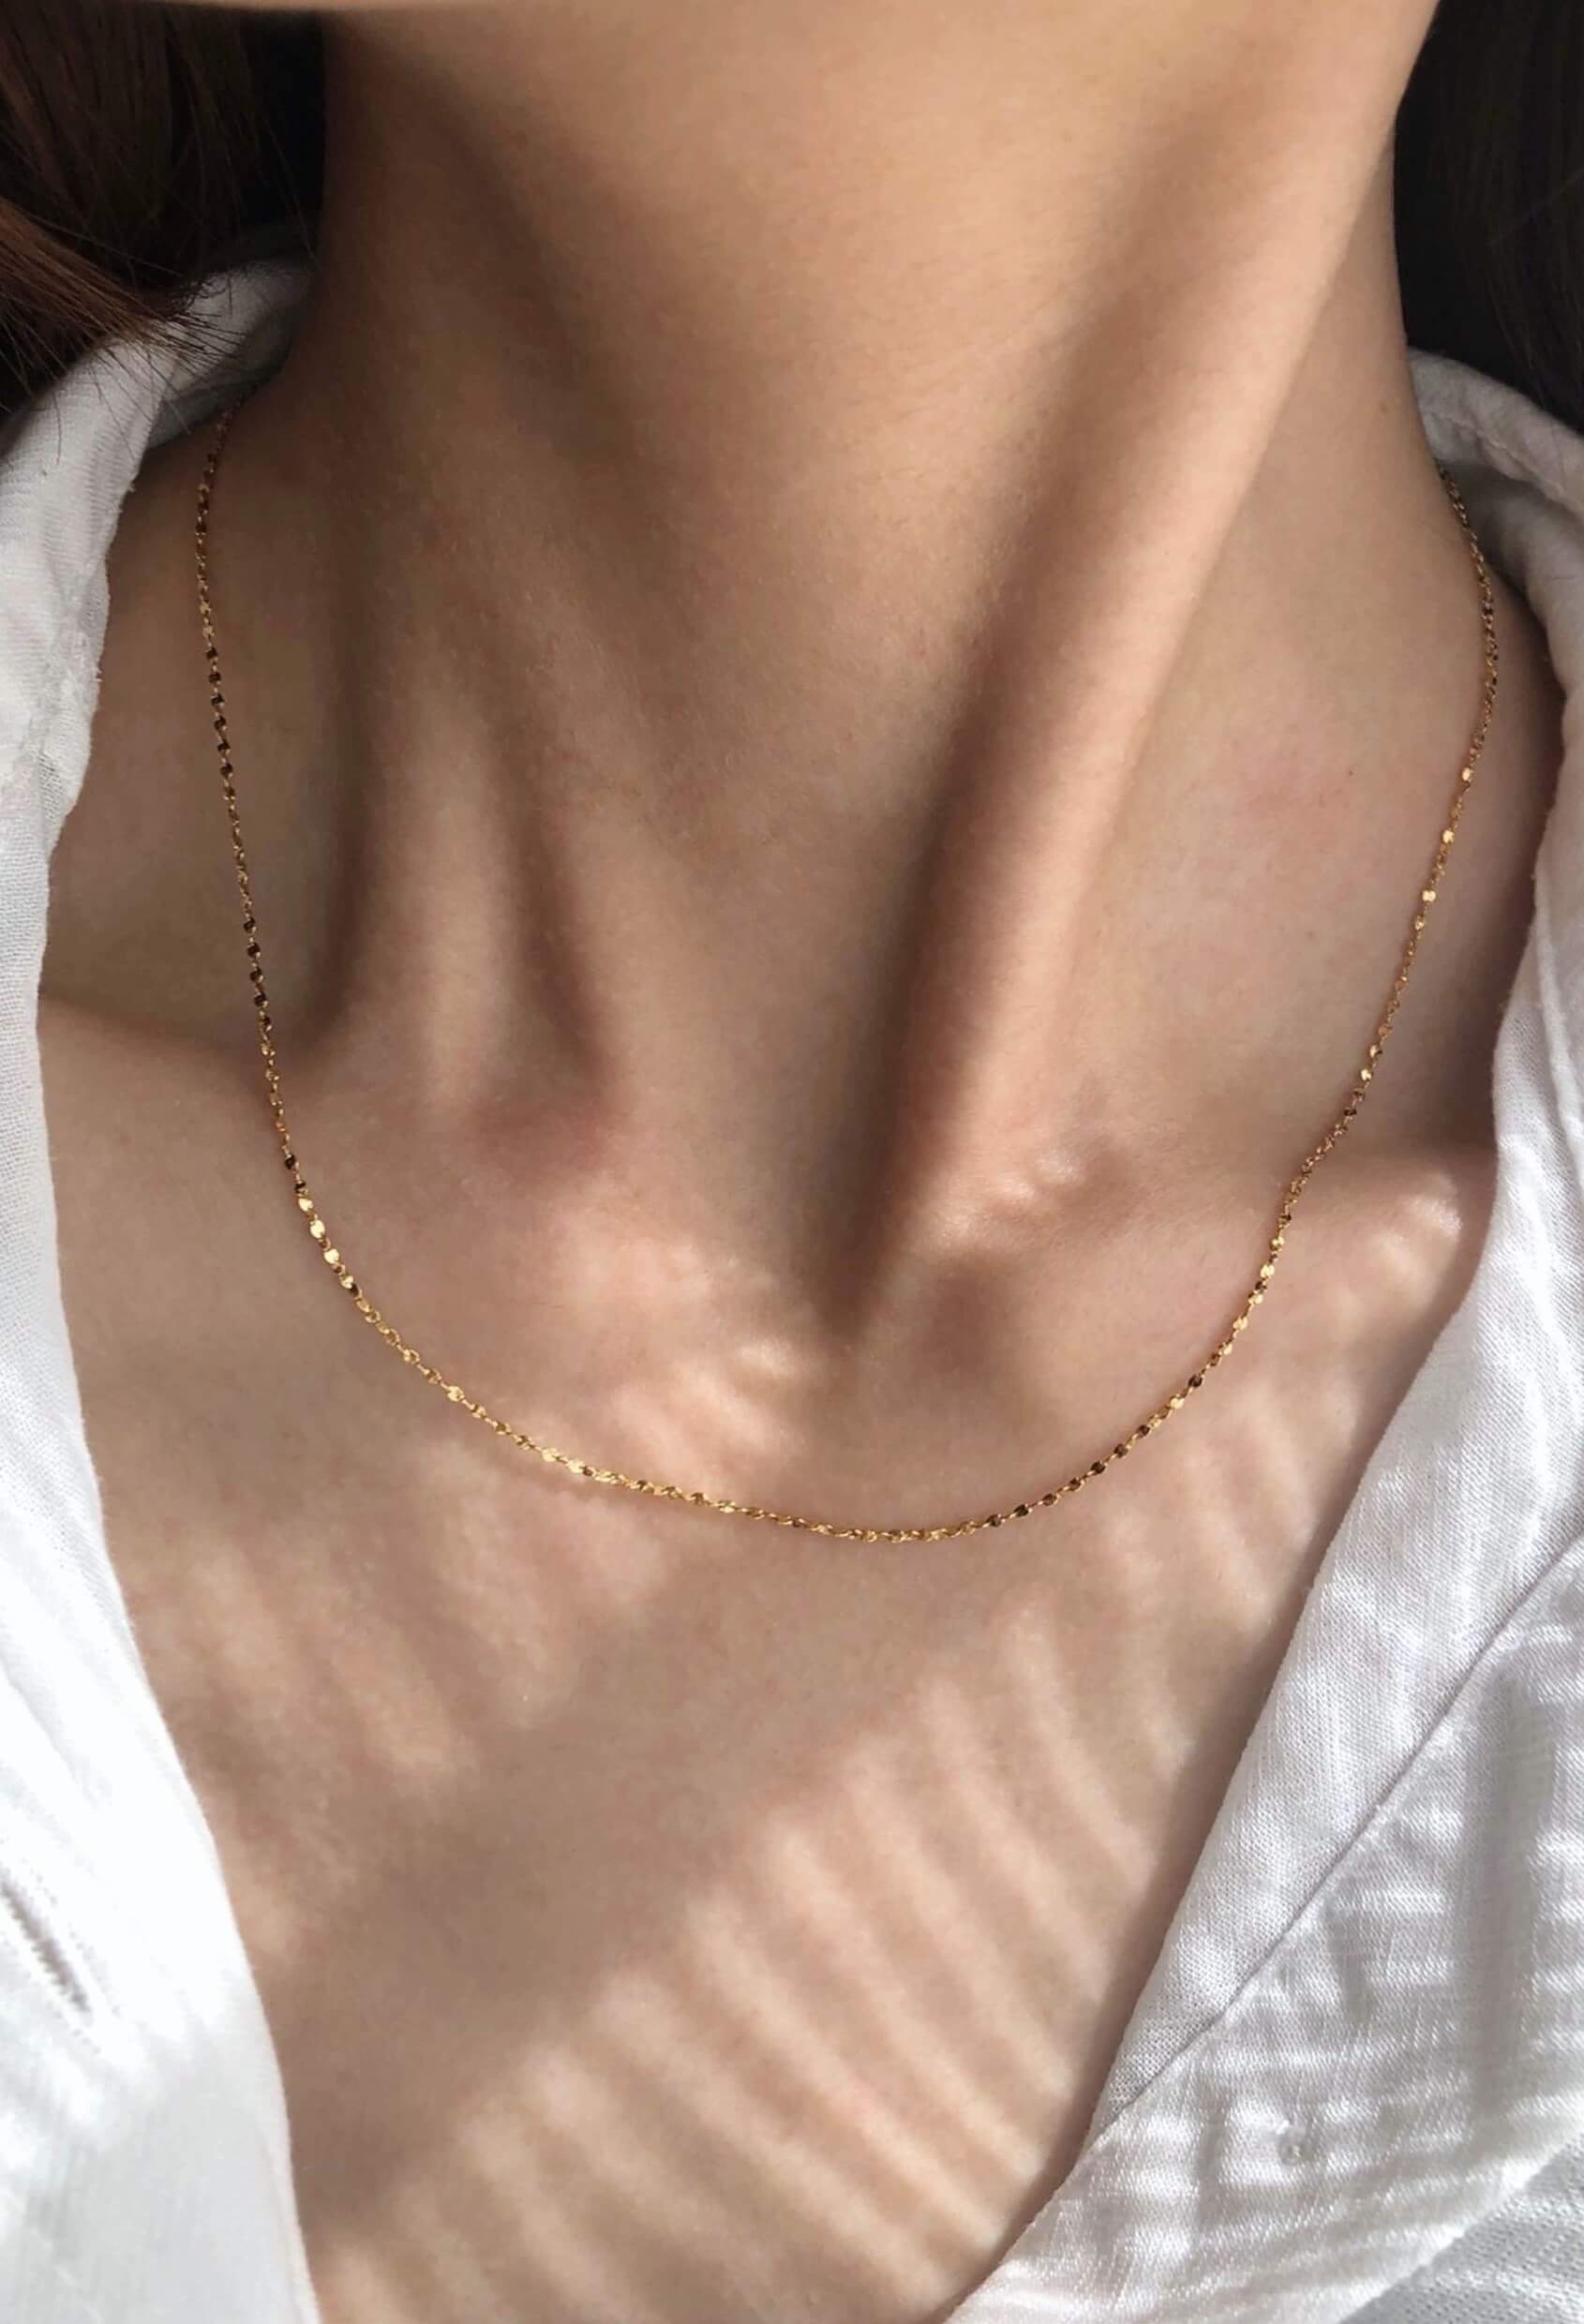 GILTY GOLD (NECKLACE)